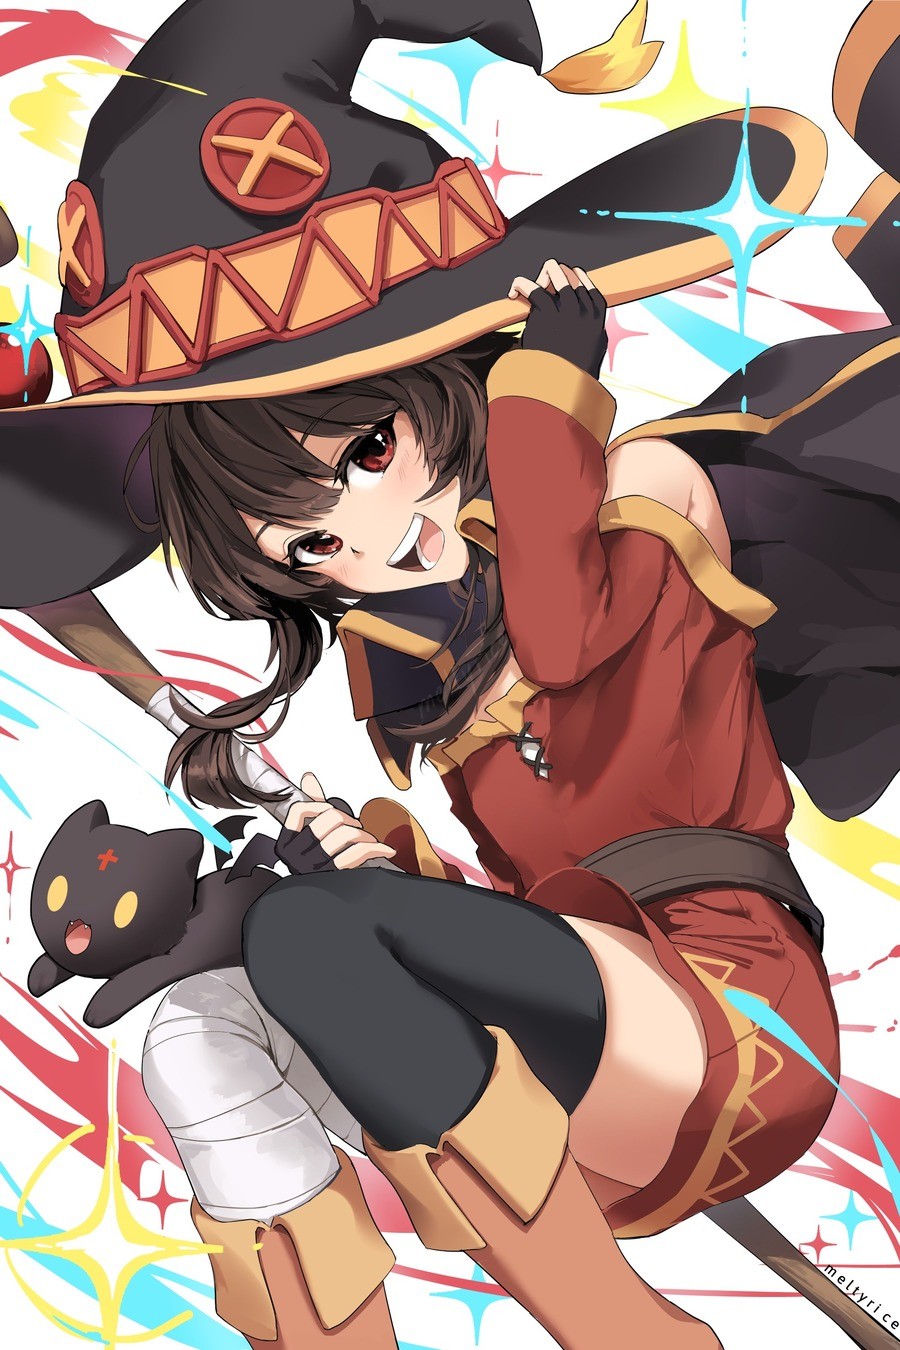 Daily Megu - 957: Megupose. join list: DailySplosion (827 subs)Mention History Source: .